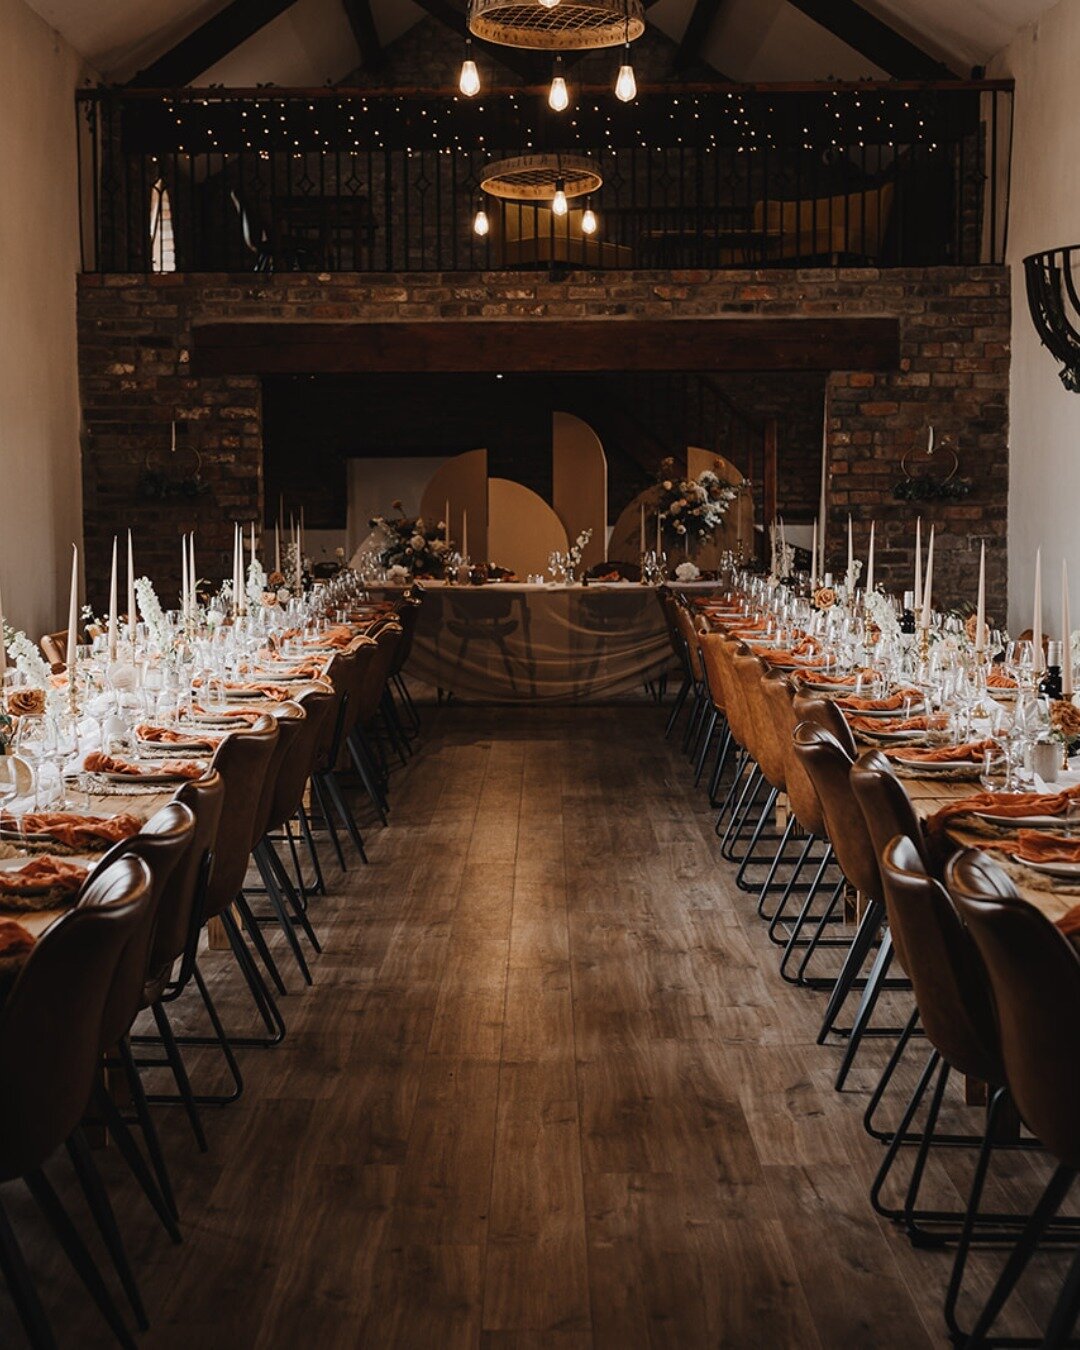 Love was definitely in the air at R &amp; I's modern barn wedding! 😍 

The sophisticated burnt orange and nude touches were absolutely stunning and perfectly complemented the happy couple's style.

Congrats again to the couple! 🎉 

​​Photographer @